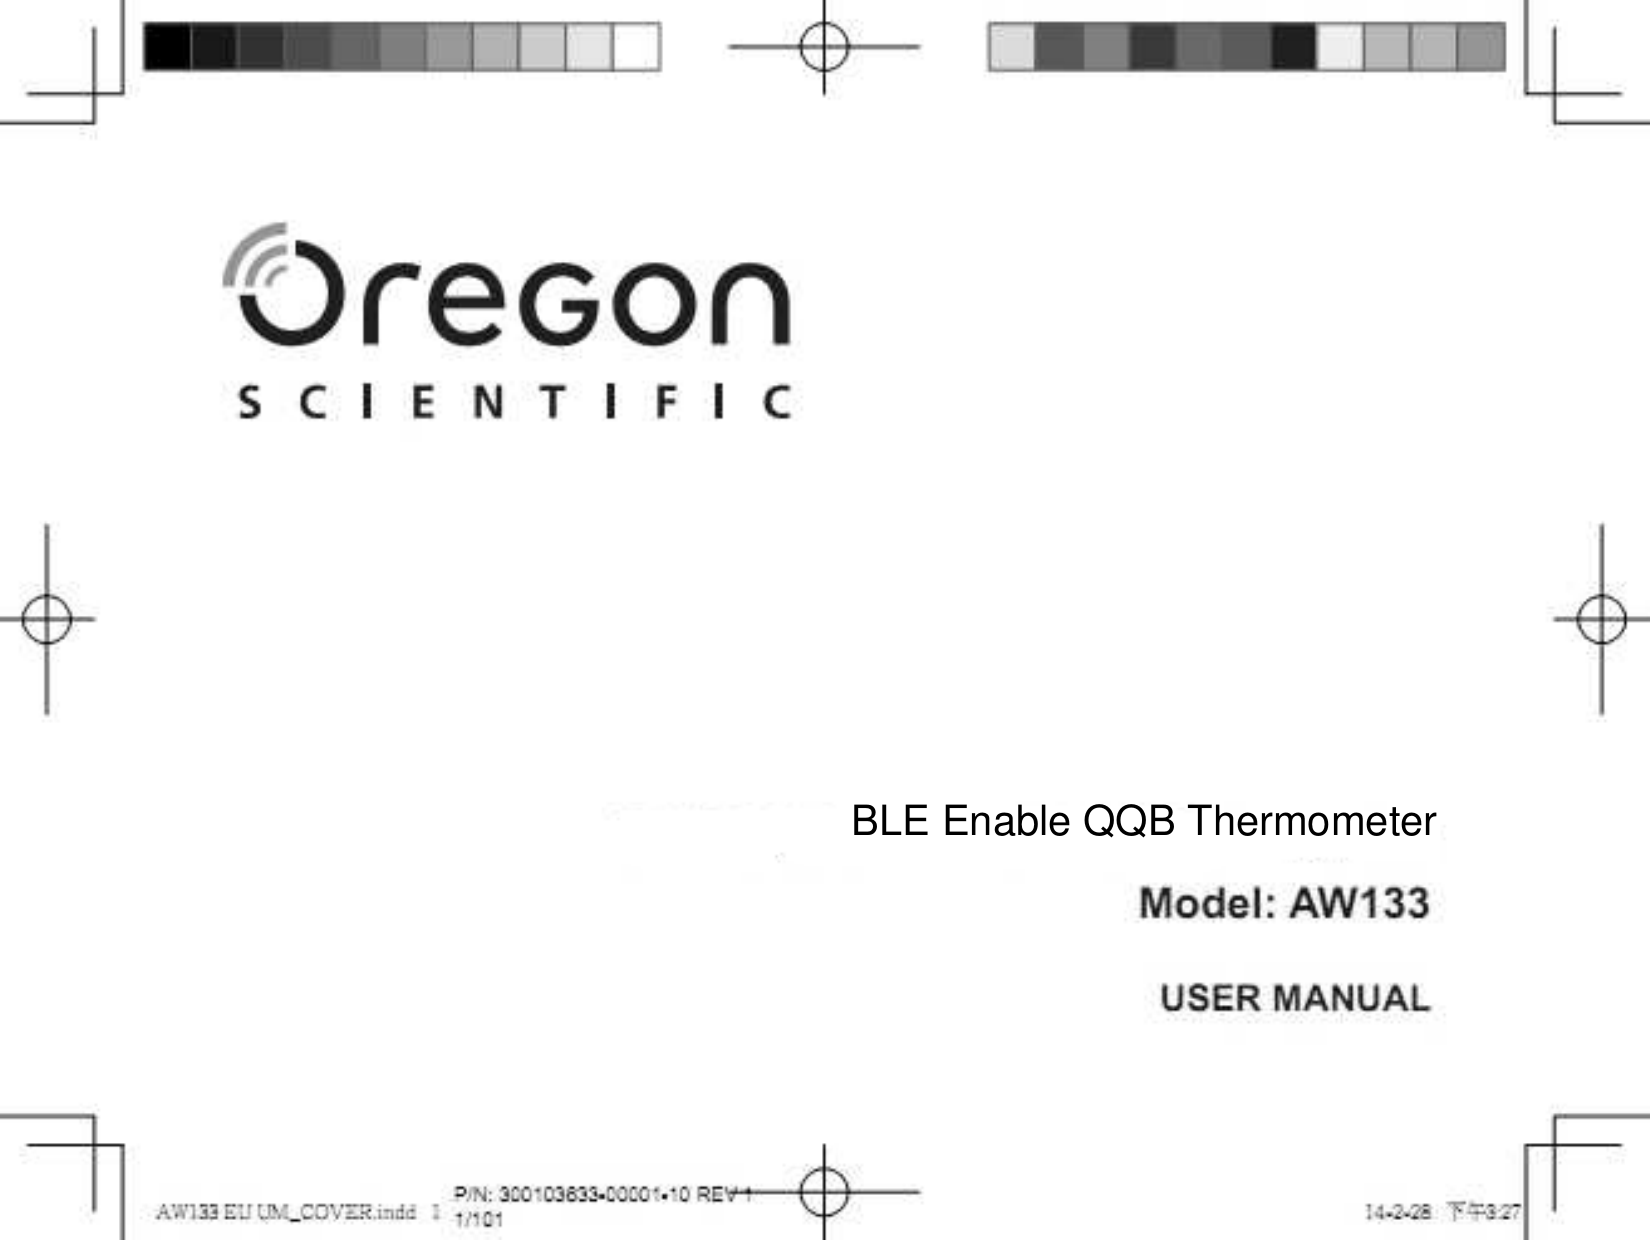 BLE Enable QQB Thermometer